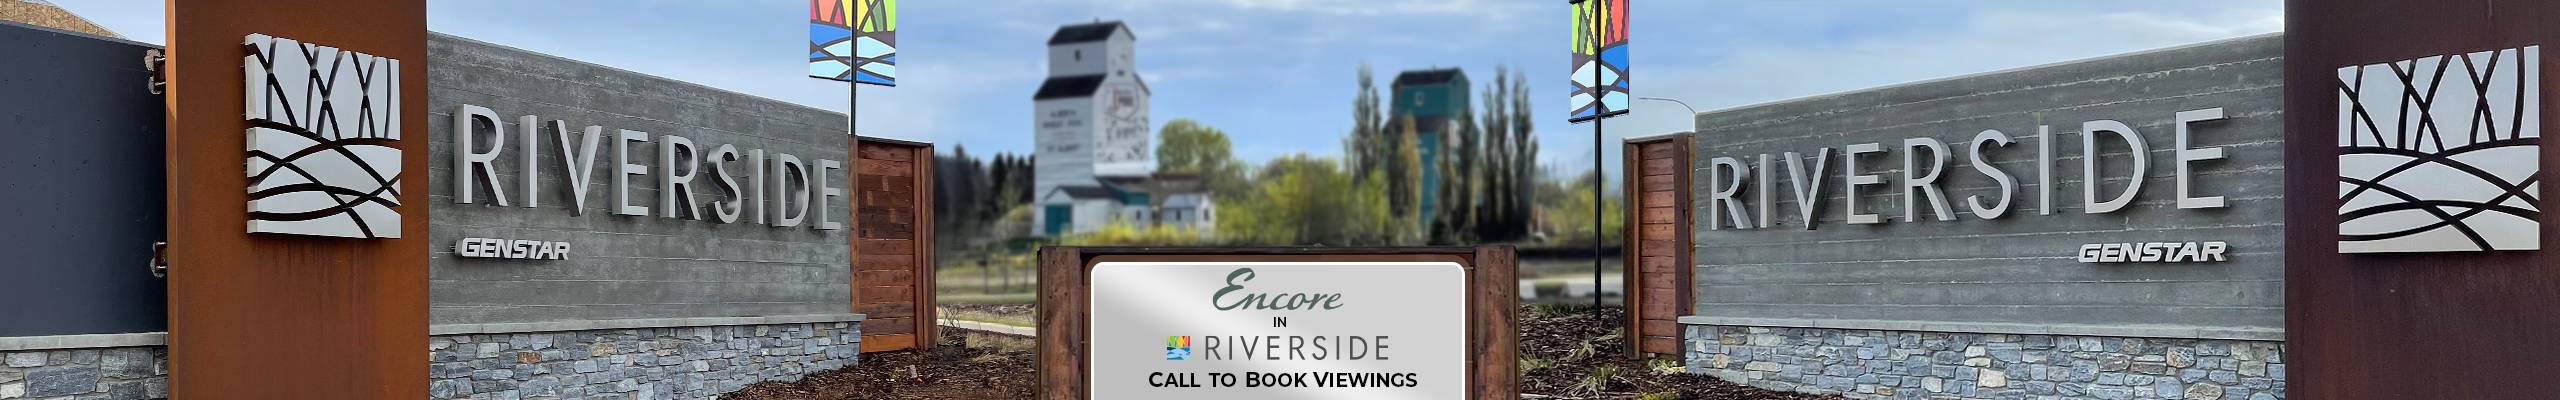 Riverside - Call to Book Viewings